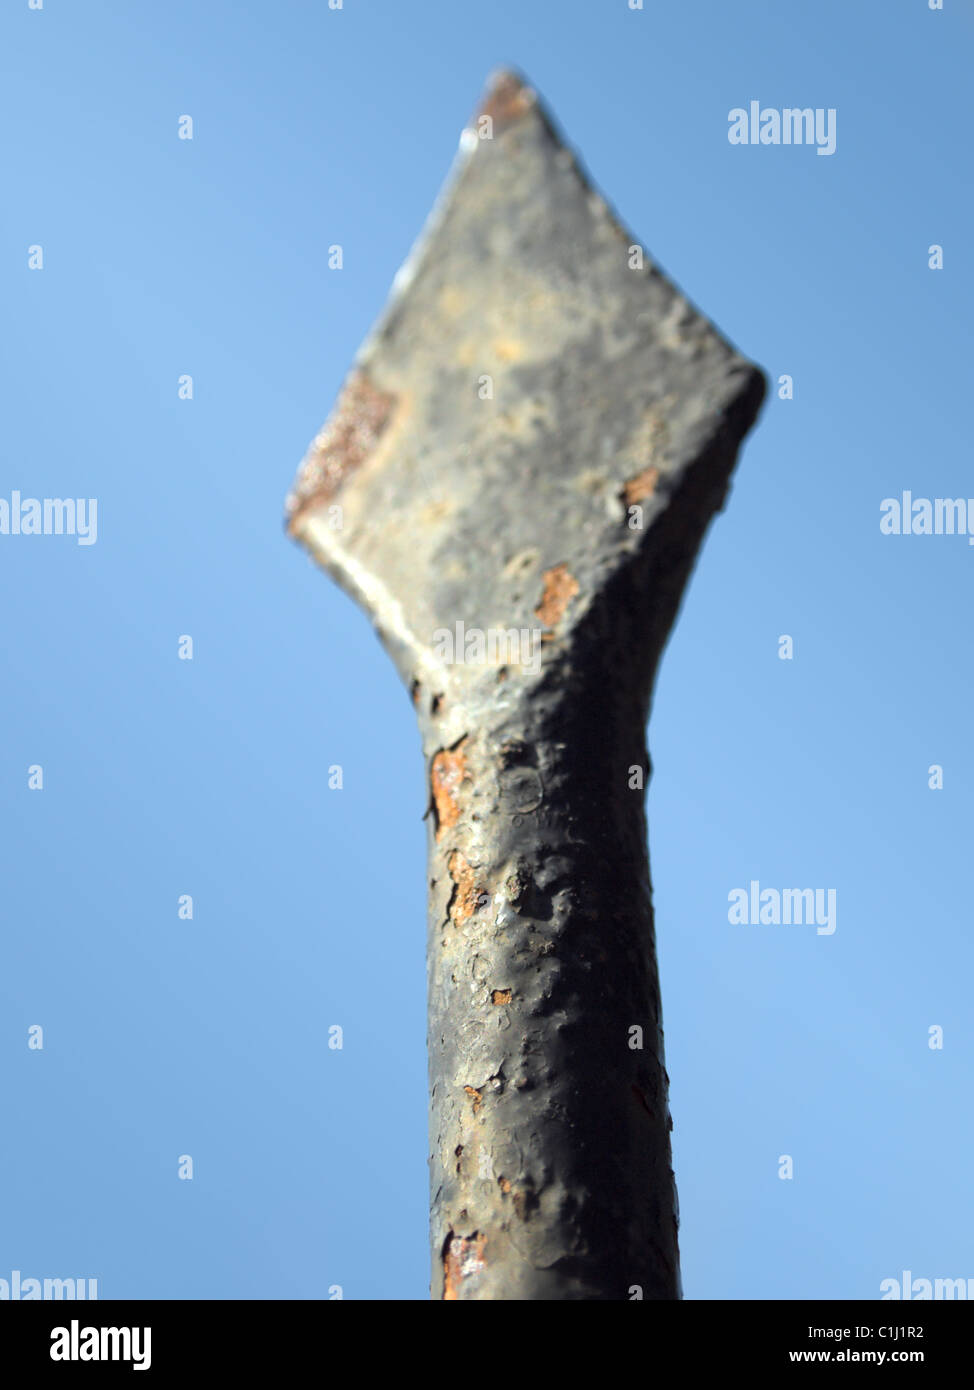 Fence rusty spearhead close-up detail against clear sky with shallow DOF Stock Photo